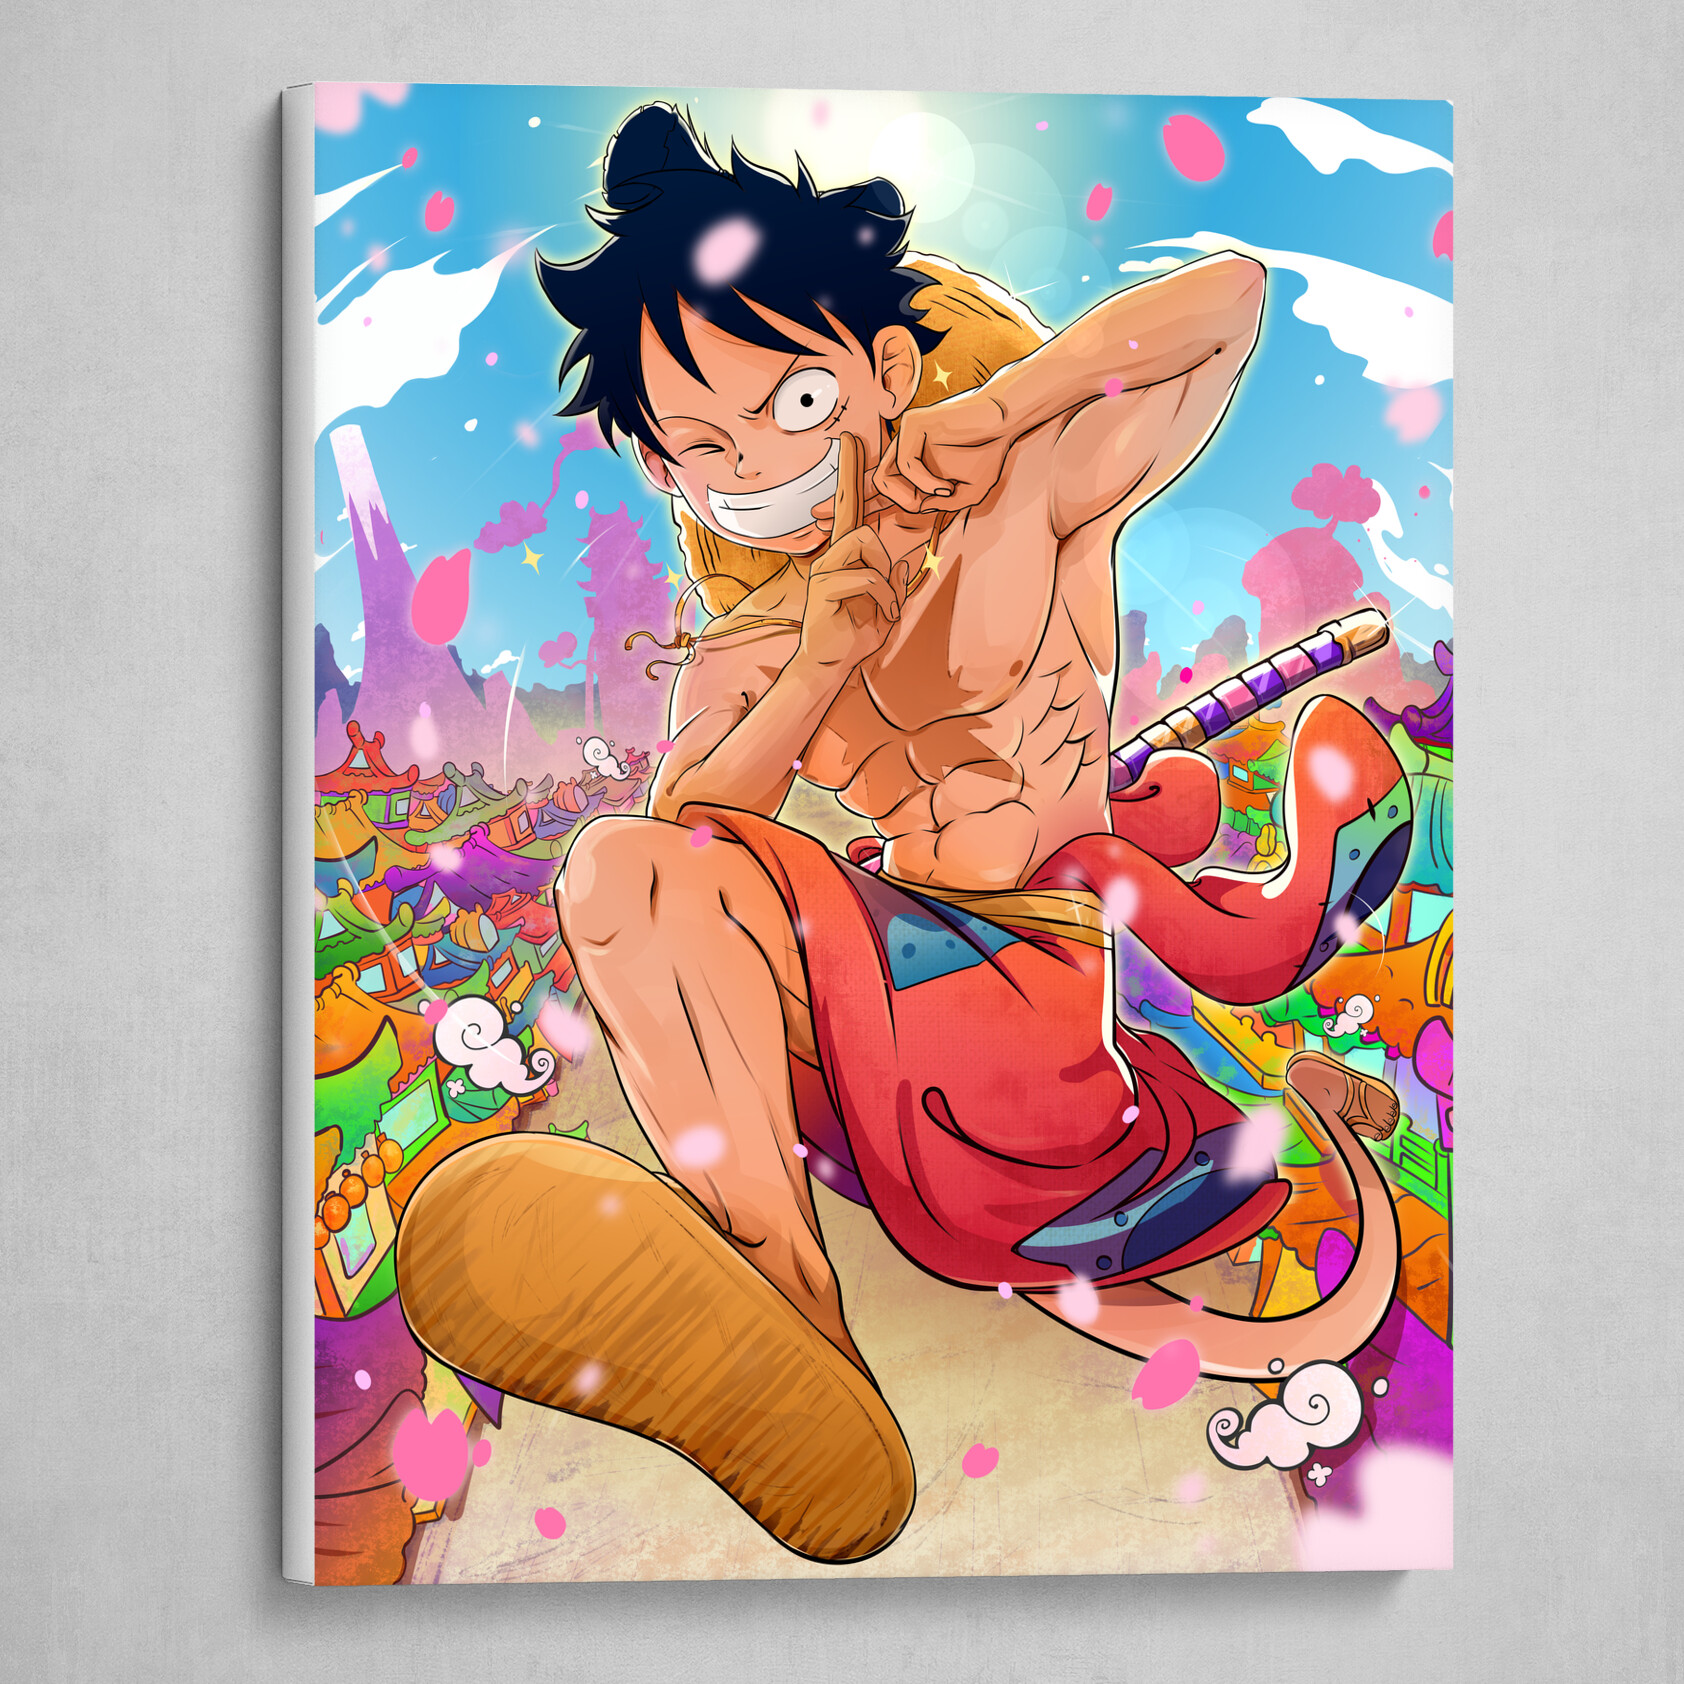 KREA - luffy and the one piece, anime artwork